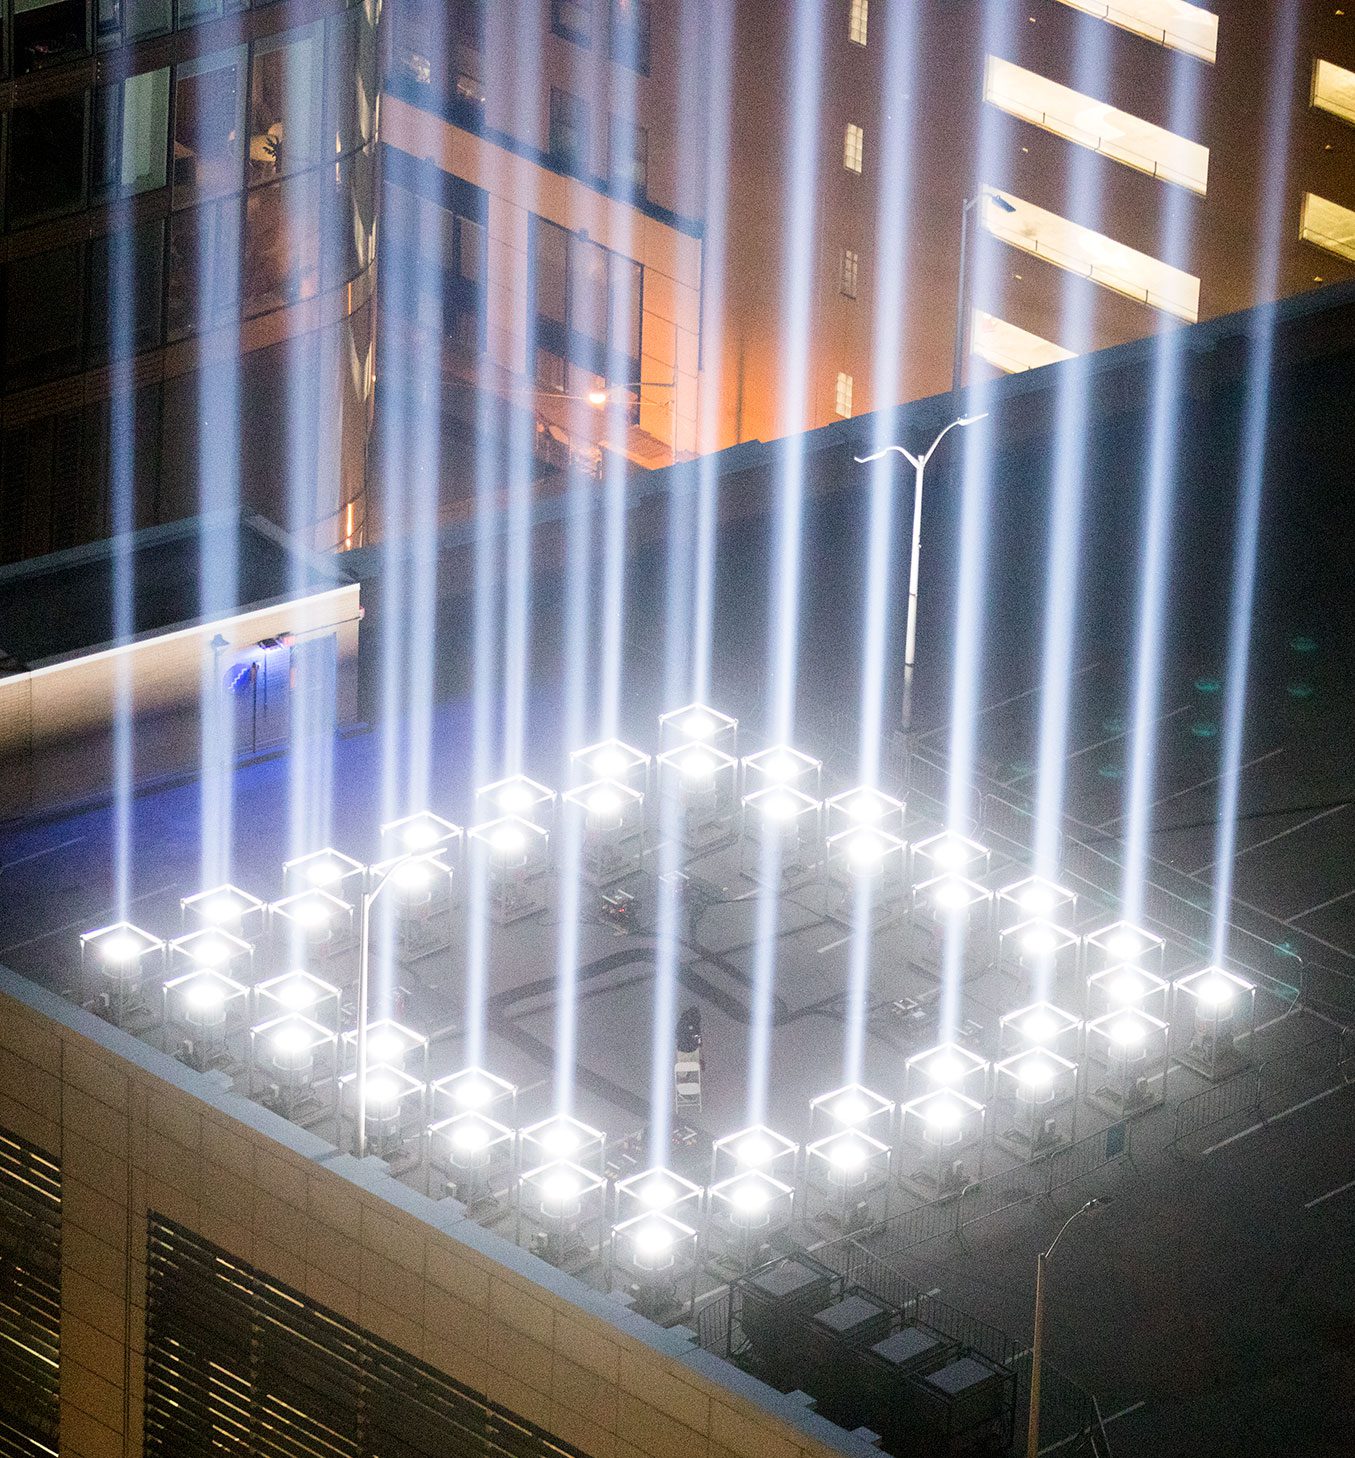 The Tribute in Light is illuminated by 88 xenon bulbs, each pumping more than 7,000 watts of light more than 2 miles into the night sky. Photo by Ben Norman.